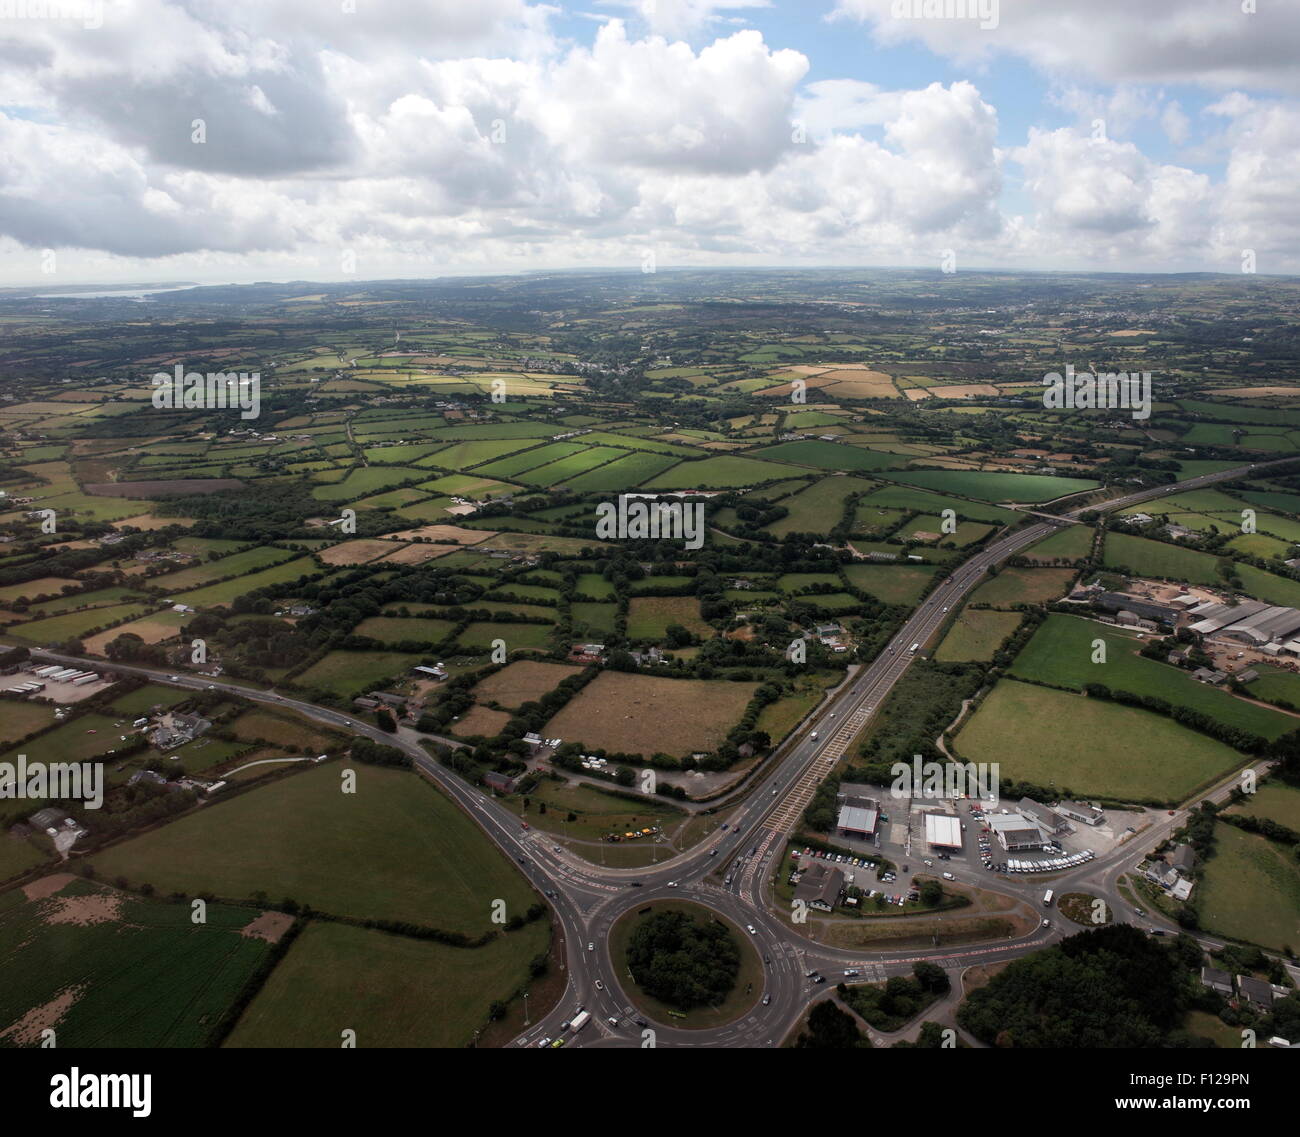 AJAXNETPHOTO. 2013. THREE BURROWS, CHIVERTON CROSS, CORNWALL, ENGLAND. - AERIAL VIEW - OF ROUNDABOUT AND ROAD INFRASTRUCTURE LOOKING SOUTH WEST WITH COASTLINE DISTANT.  PHOTO:JONATHAN EASTLAND/AJAX REF:GR132307 325 Stock Photo